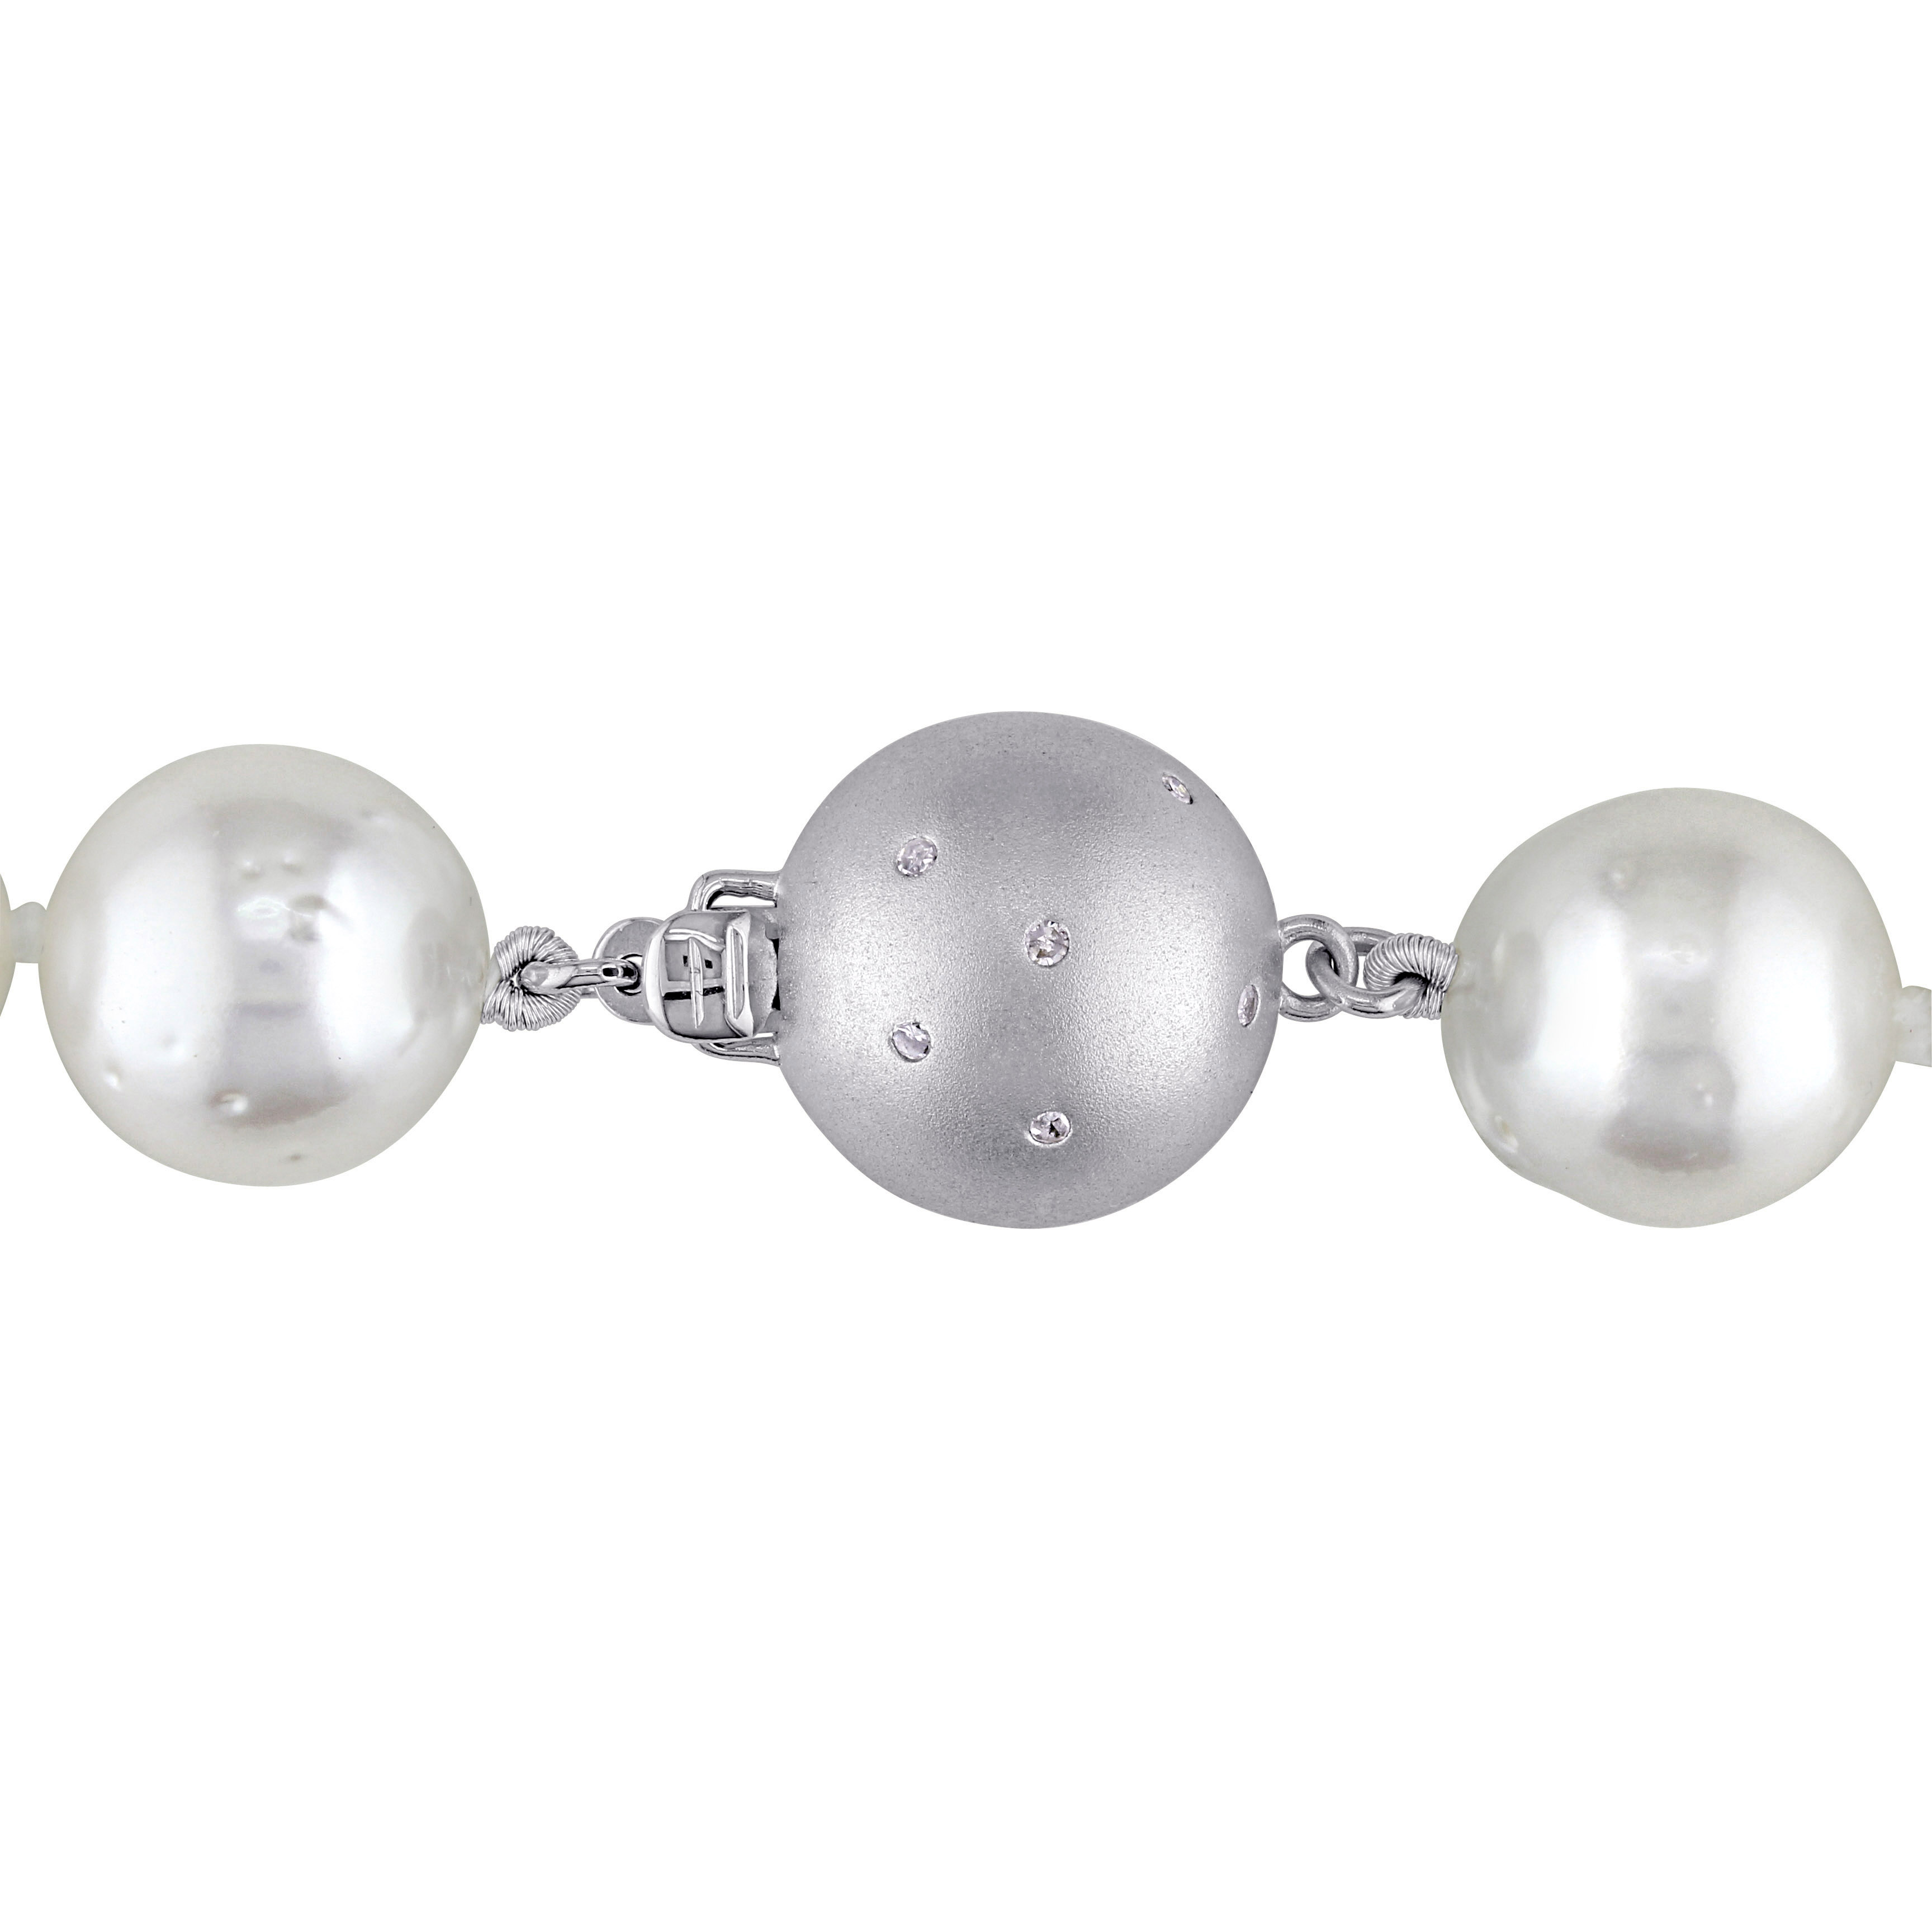 10 -12 MM South Sea Pearl Strand Necklace with 14k White Gold Clasp - 18 in